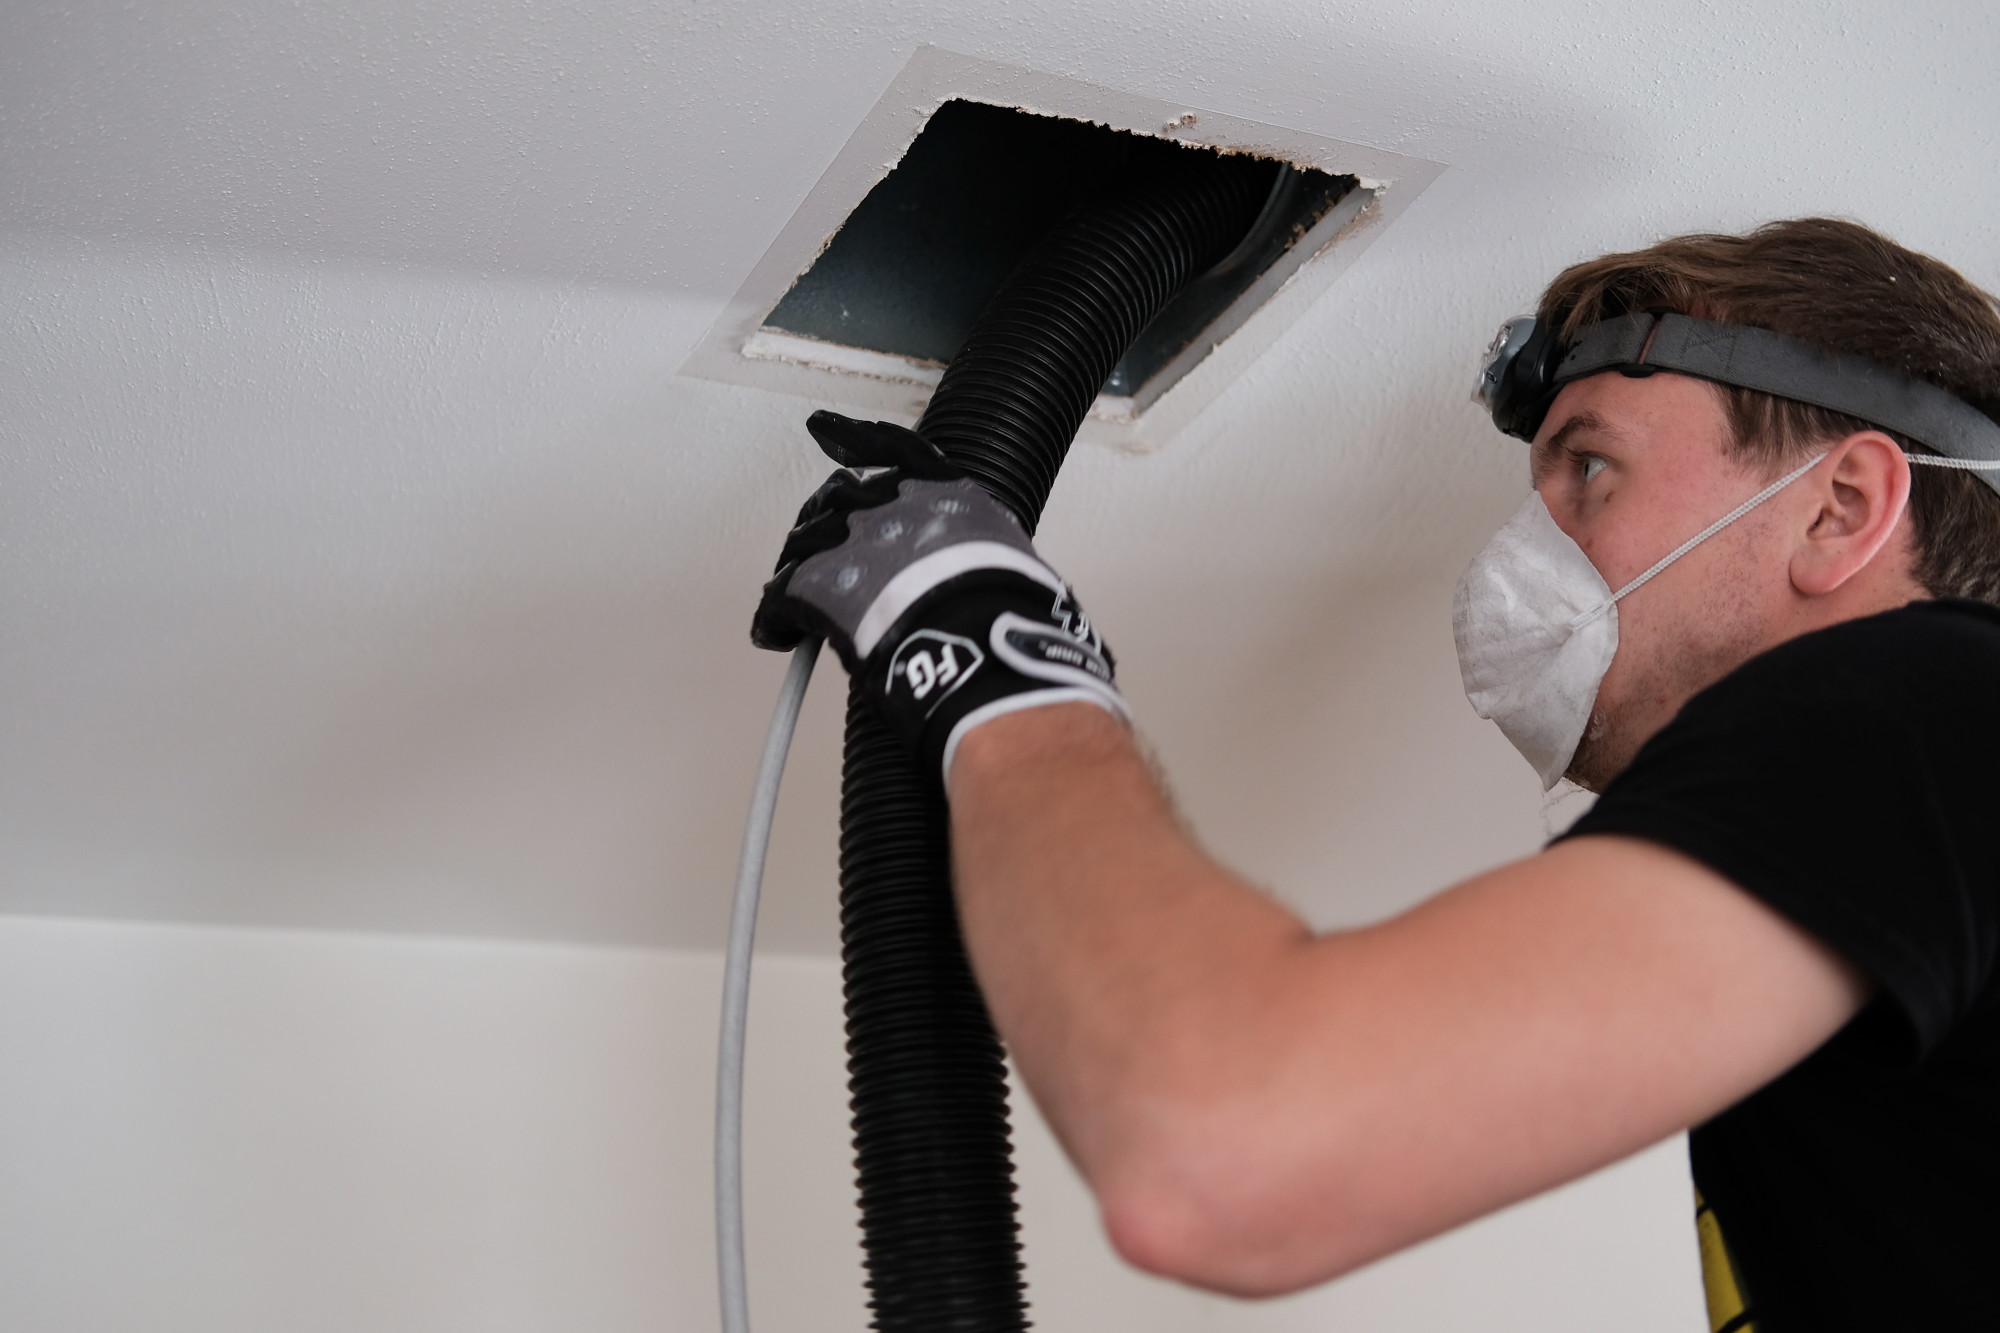 A technician cleaning air ducts in a ceiling.